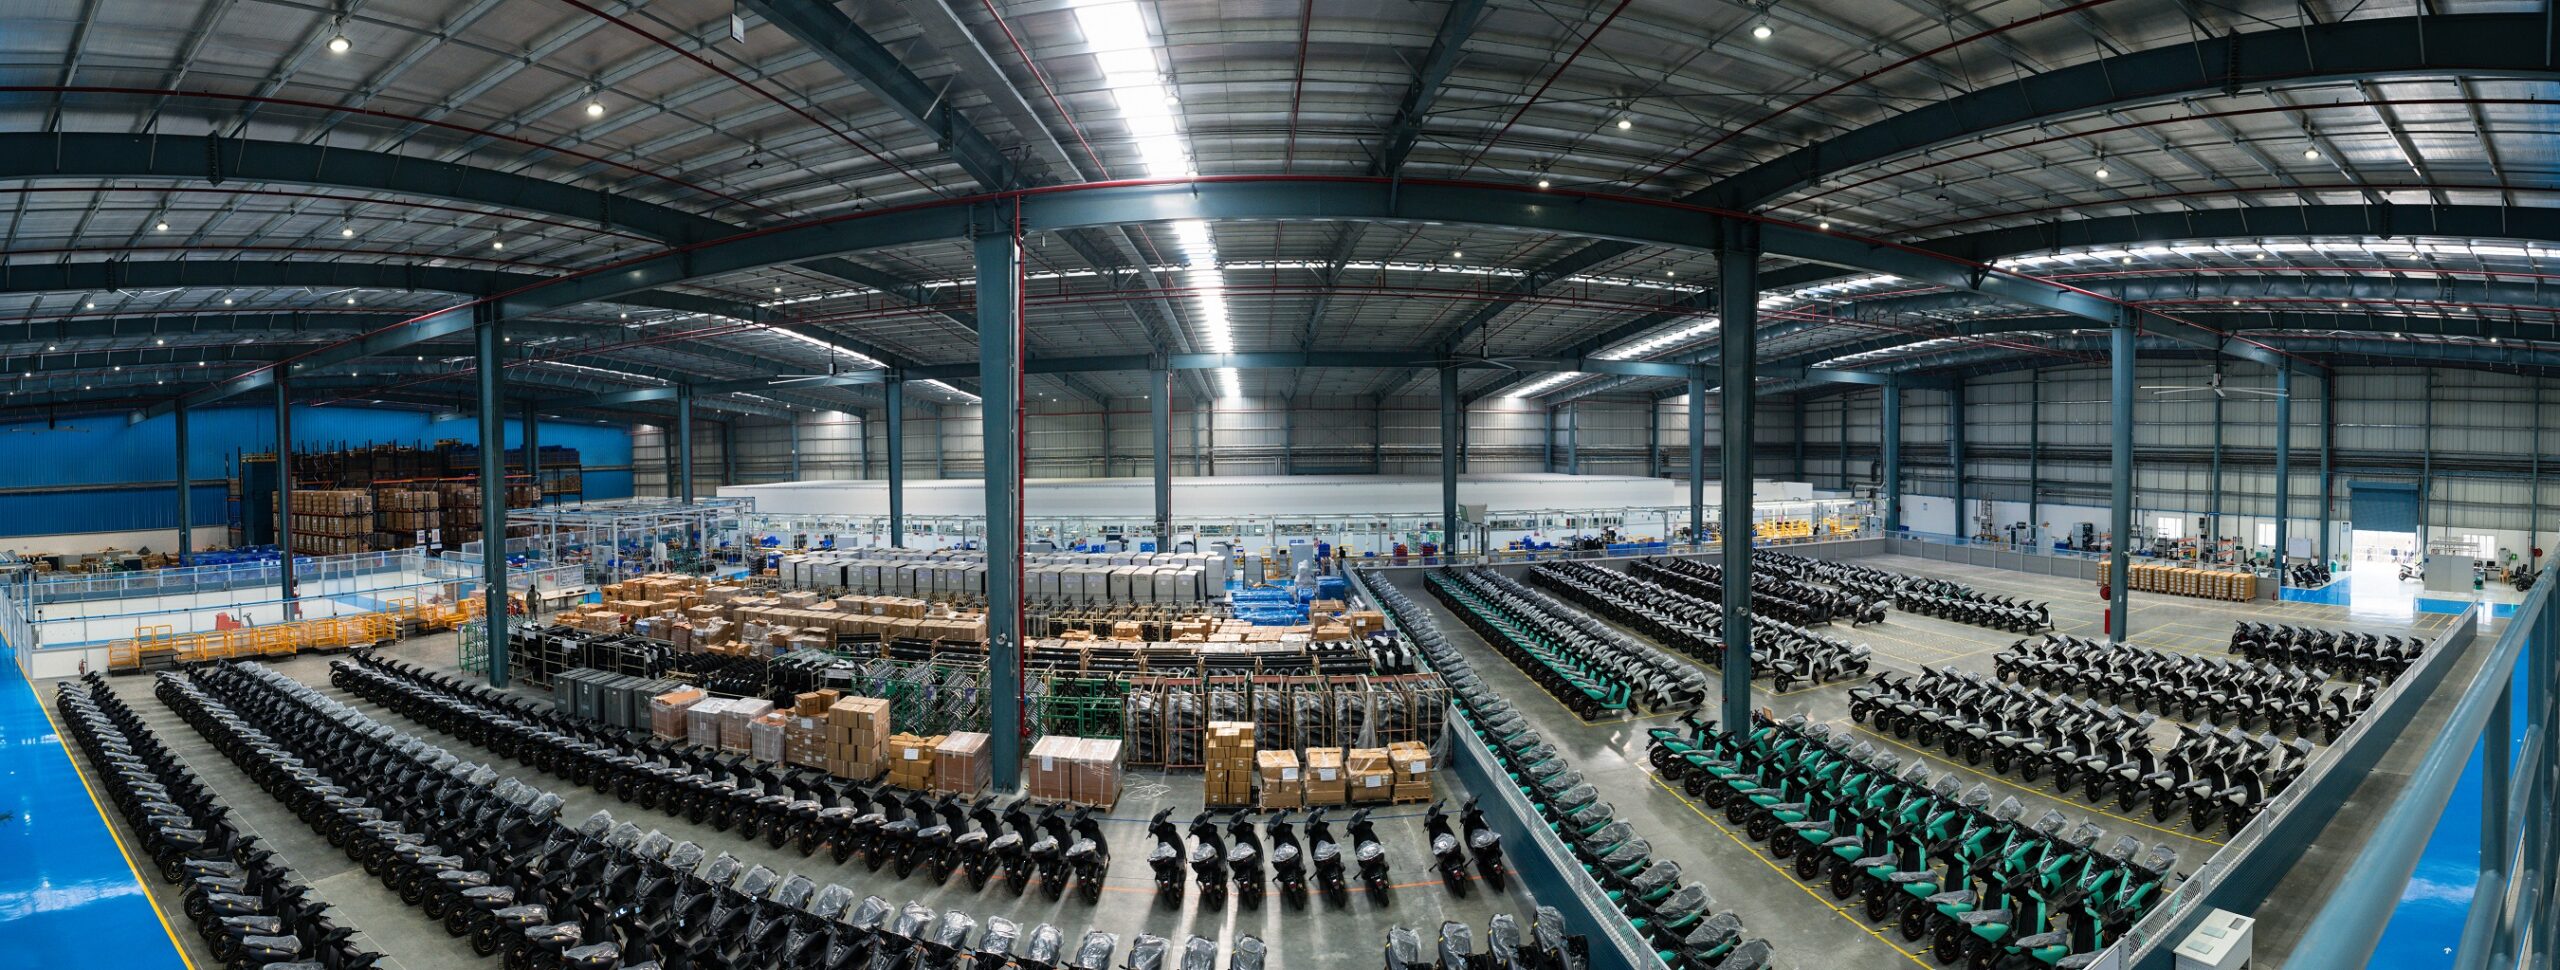 Ather Energy Factory, Hosur (2)